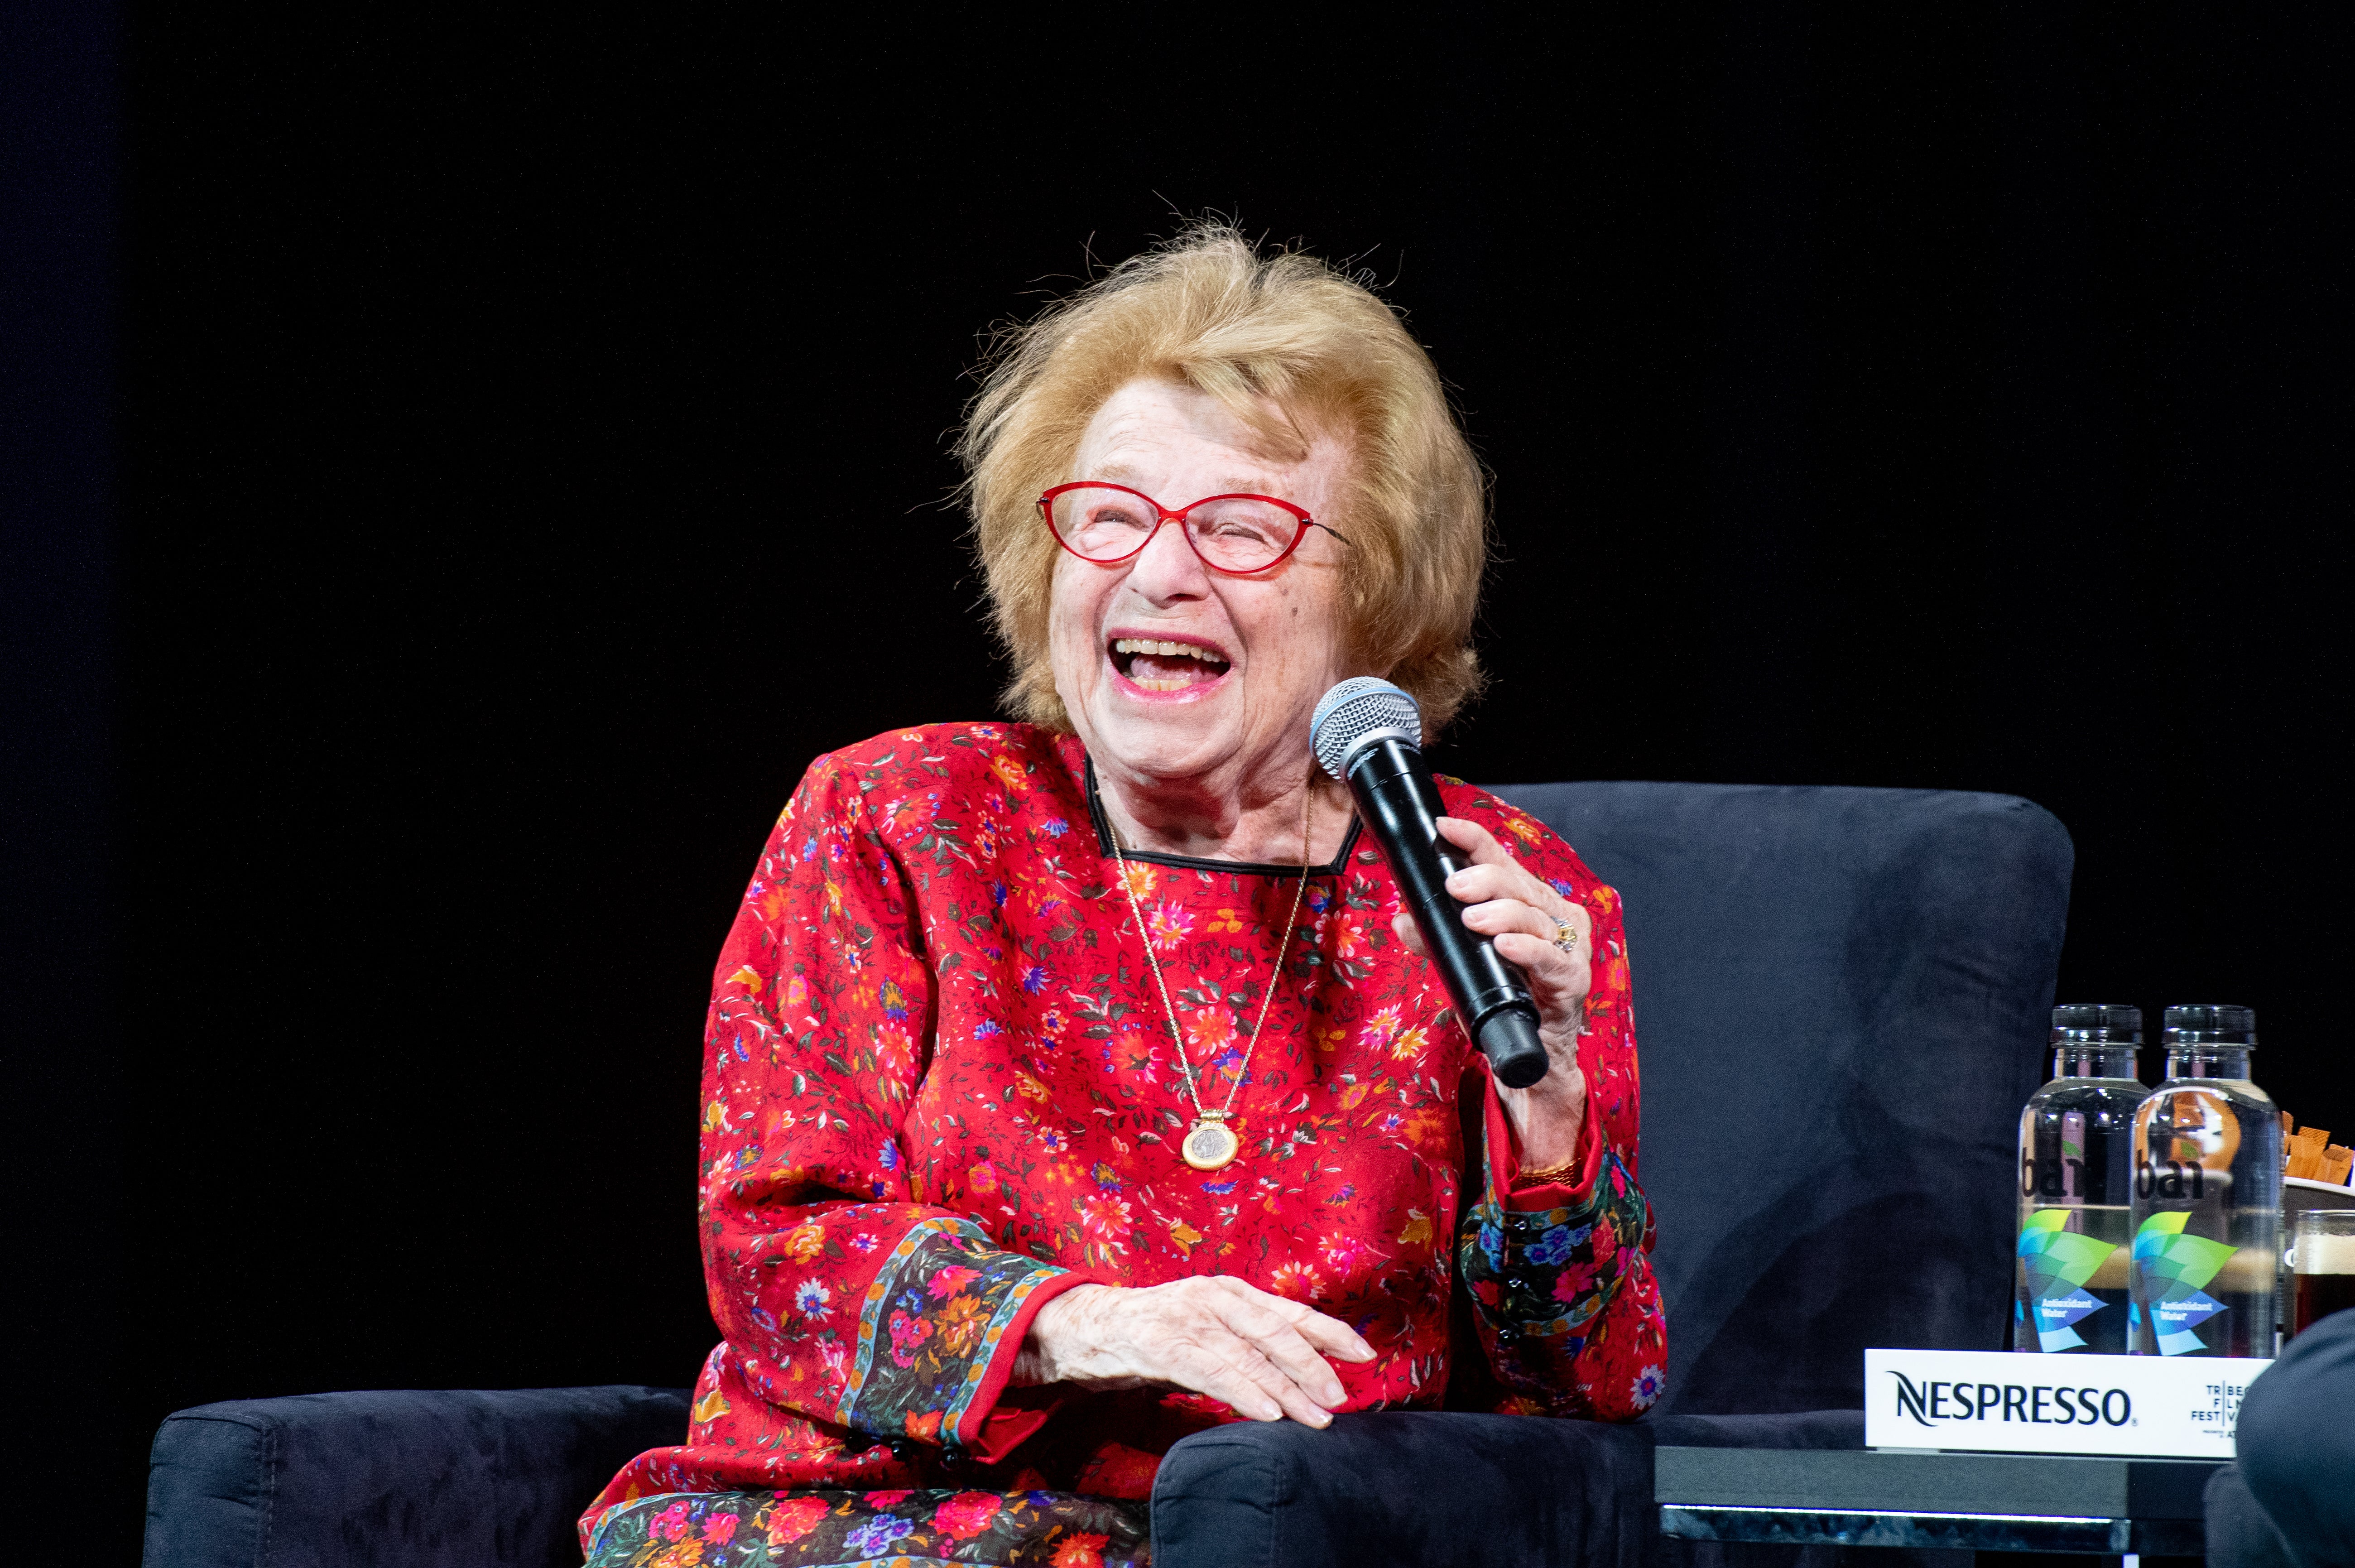 Dr. Ruth Westheimer died at the age of 96 in her home in Manhattan